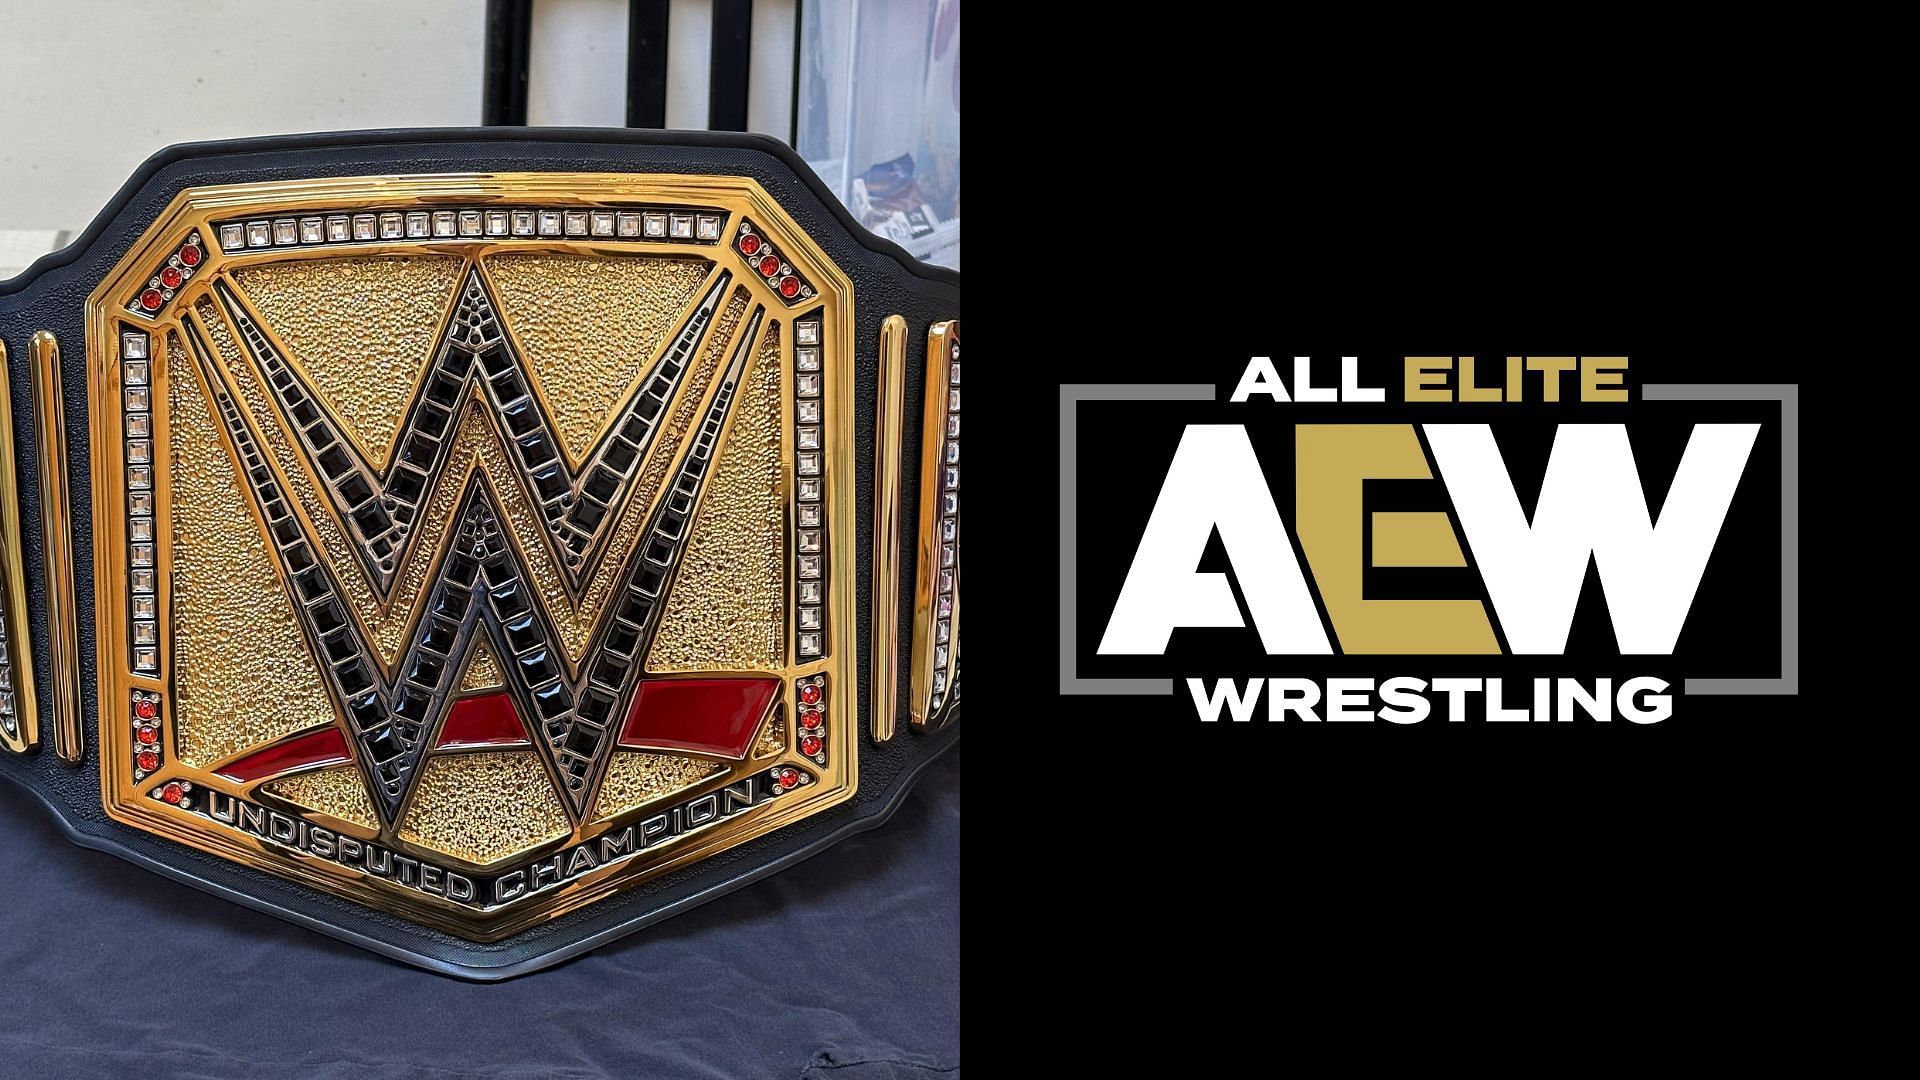 Undisputed WWE Championship (left), AEW logo (right)